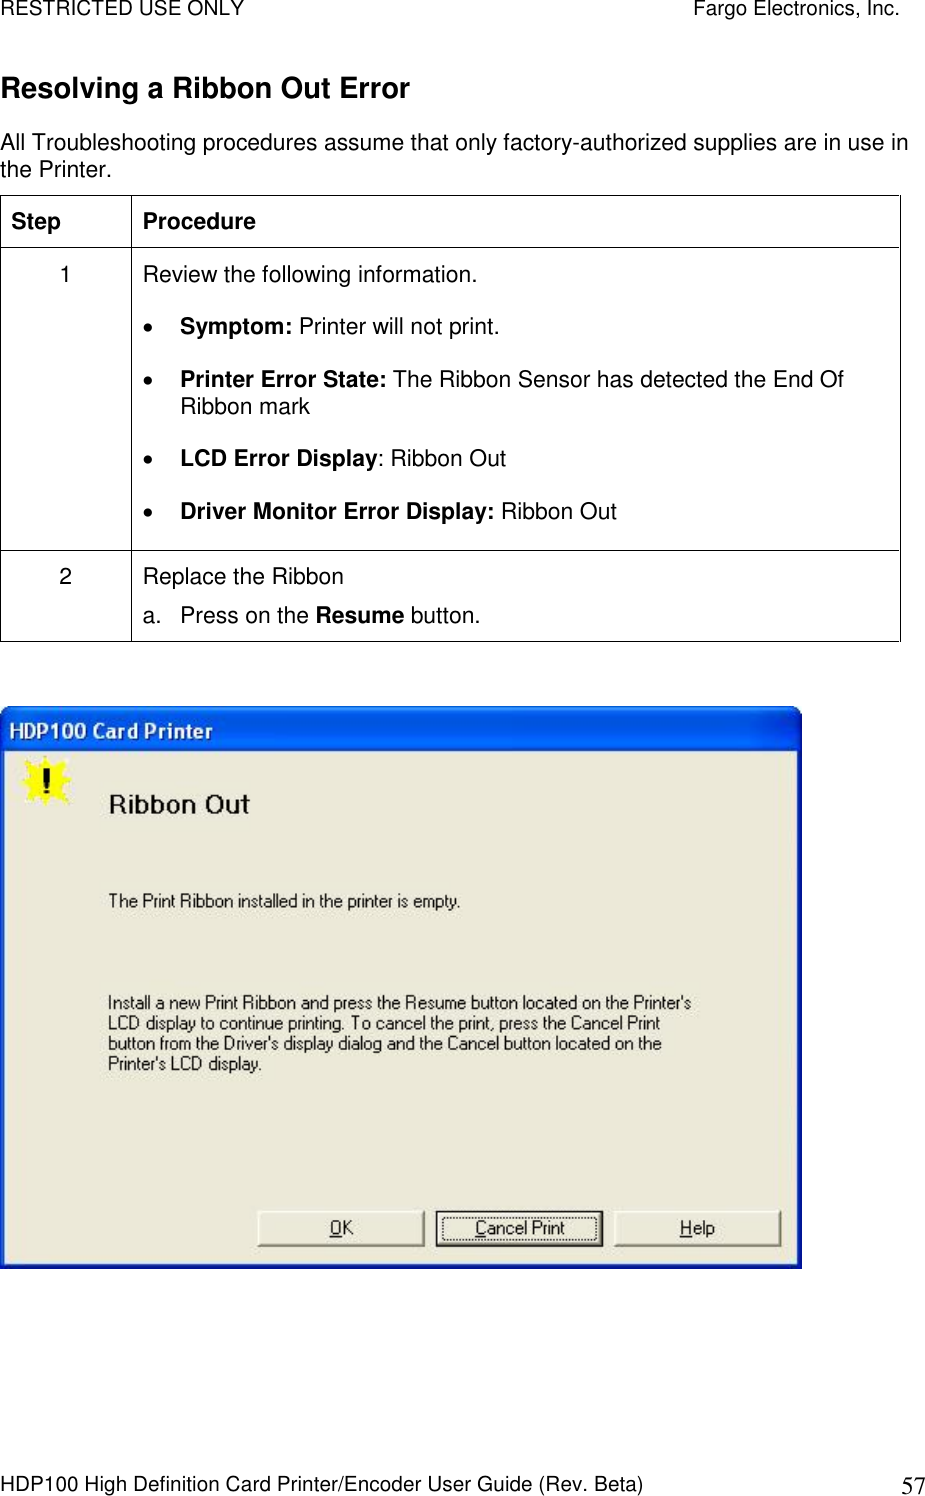 RESTRICTED USE ONLY    Fargo Electronics, Inc. HDP100 High Definition Card Printer/Encoder User Guide (Rev. Beta)  57 Resolving a Ribbon Out Error  All Troubleshooting procedures assume that only factory-authorized supplies are in use in the Printer.  Step  Procedure 1  Review the following information.   Symptom: Printer will not print.  Printer Error State: The Ribbon Sensor has detected the End Of Ribbon mark  LCD Error Display: Ribbon Out  Driver Monitor Error Display: Ribbon Out 2  Replace the Ribbon a.  Press on the Resume button.   